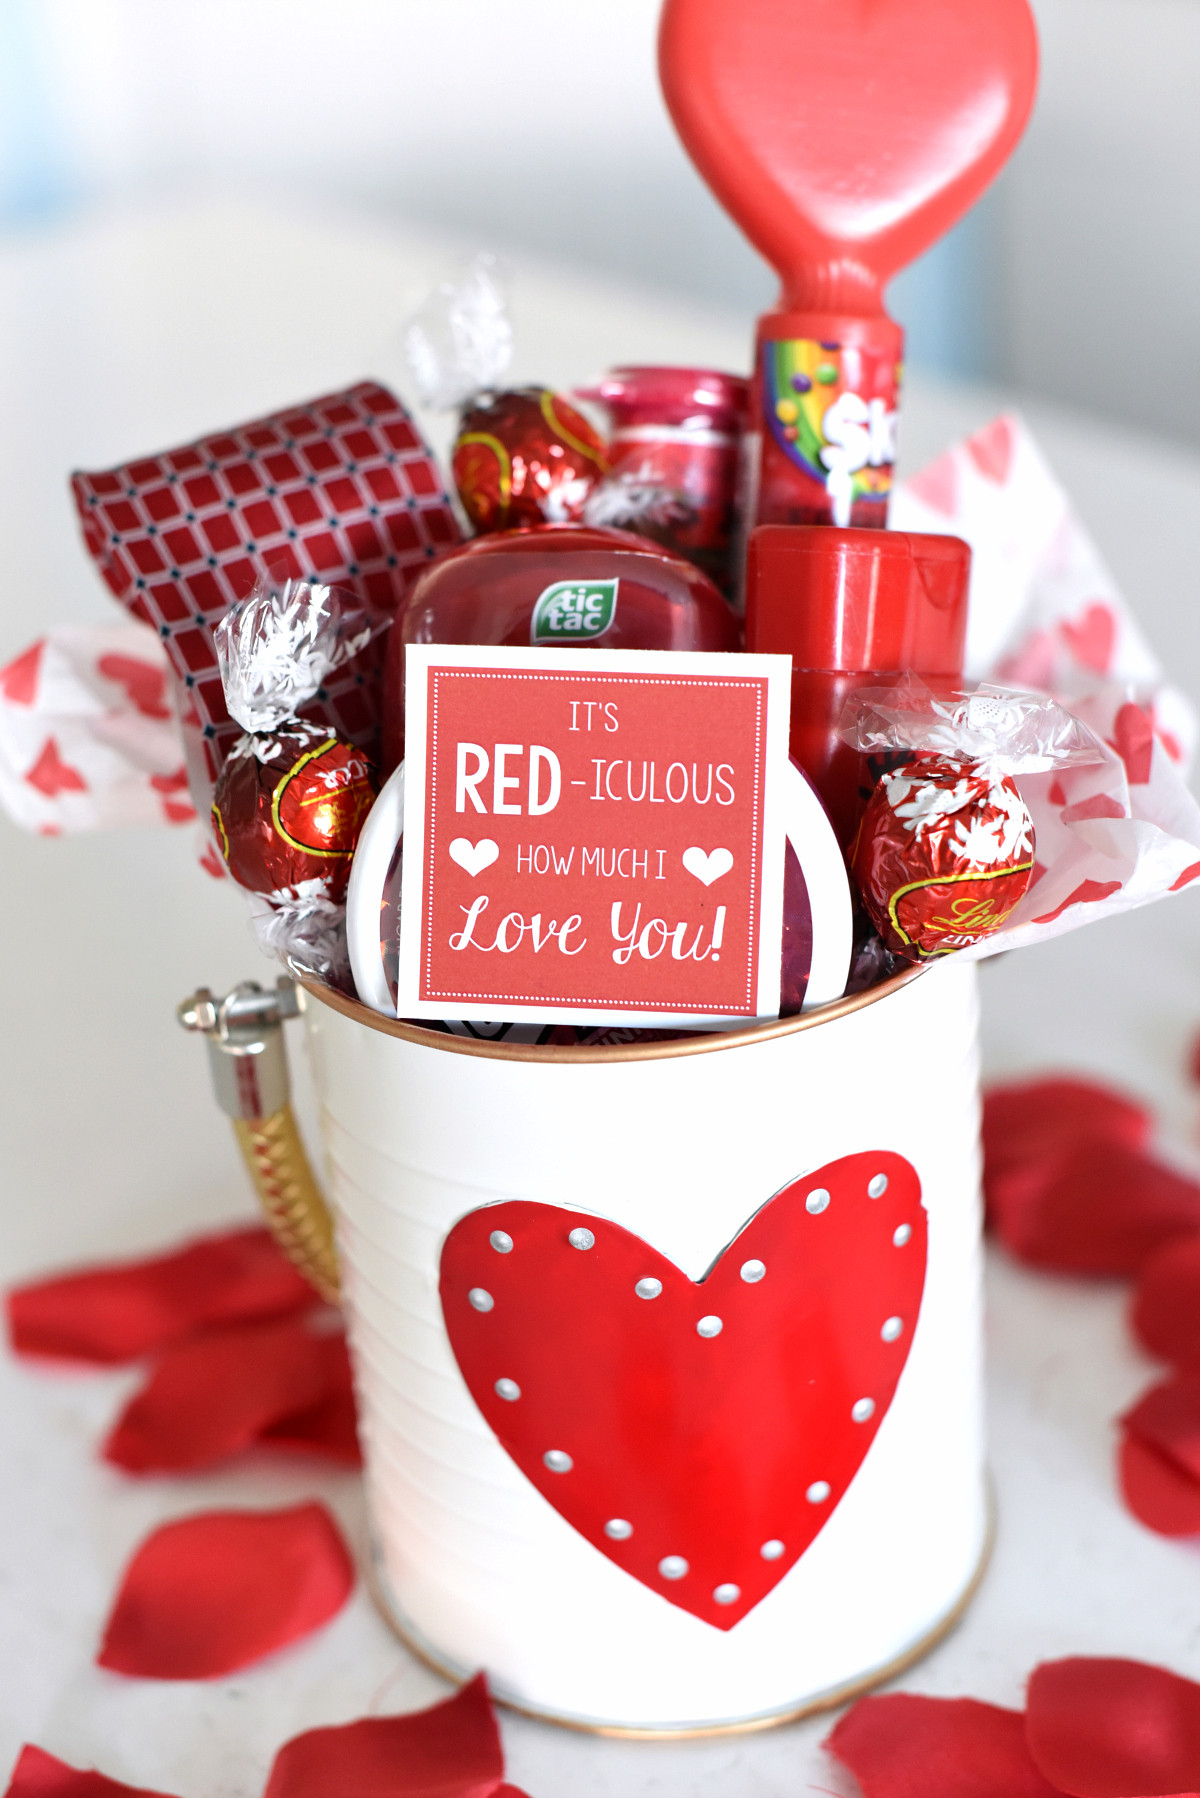 Valentine Gift Husband Ideas
 Cute Valentine s Day Gift Idea RED iculous Basket